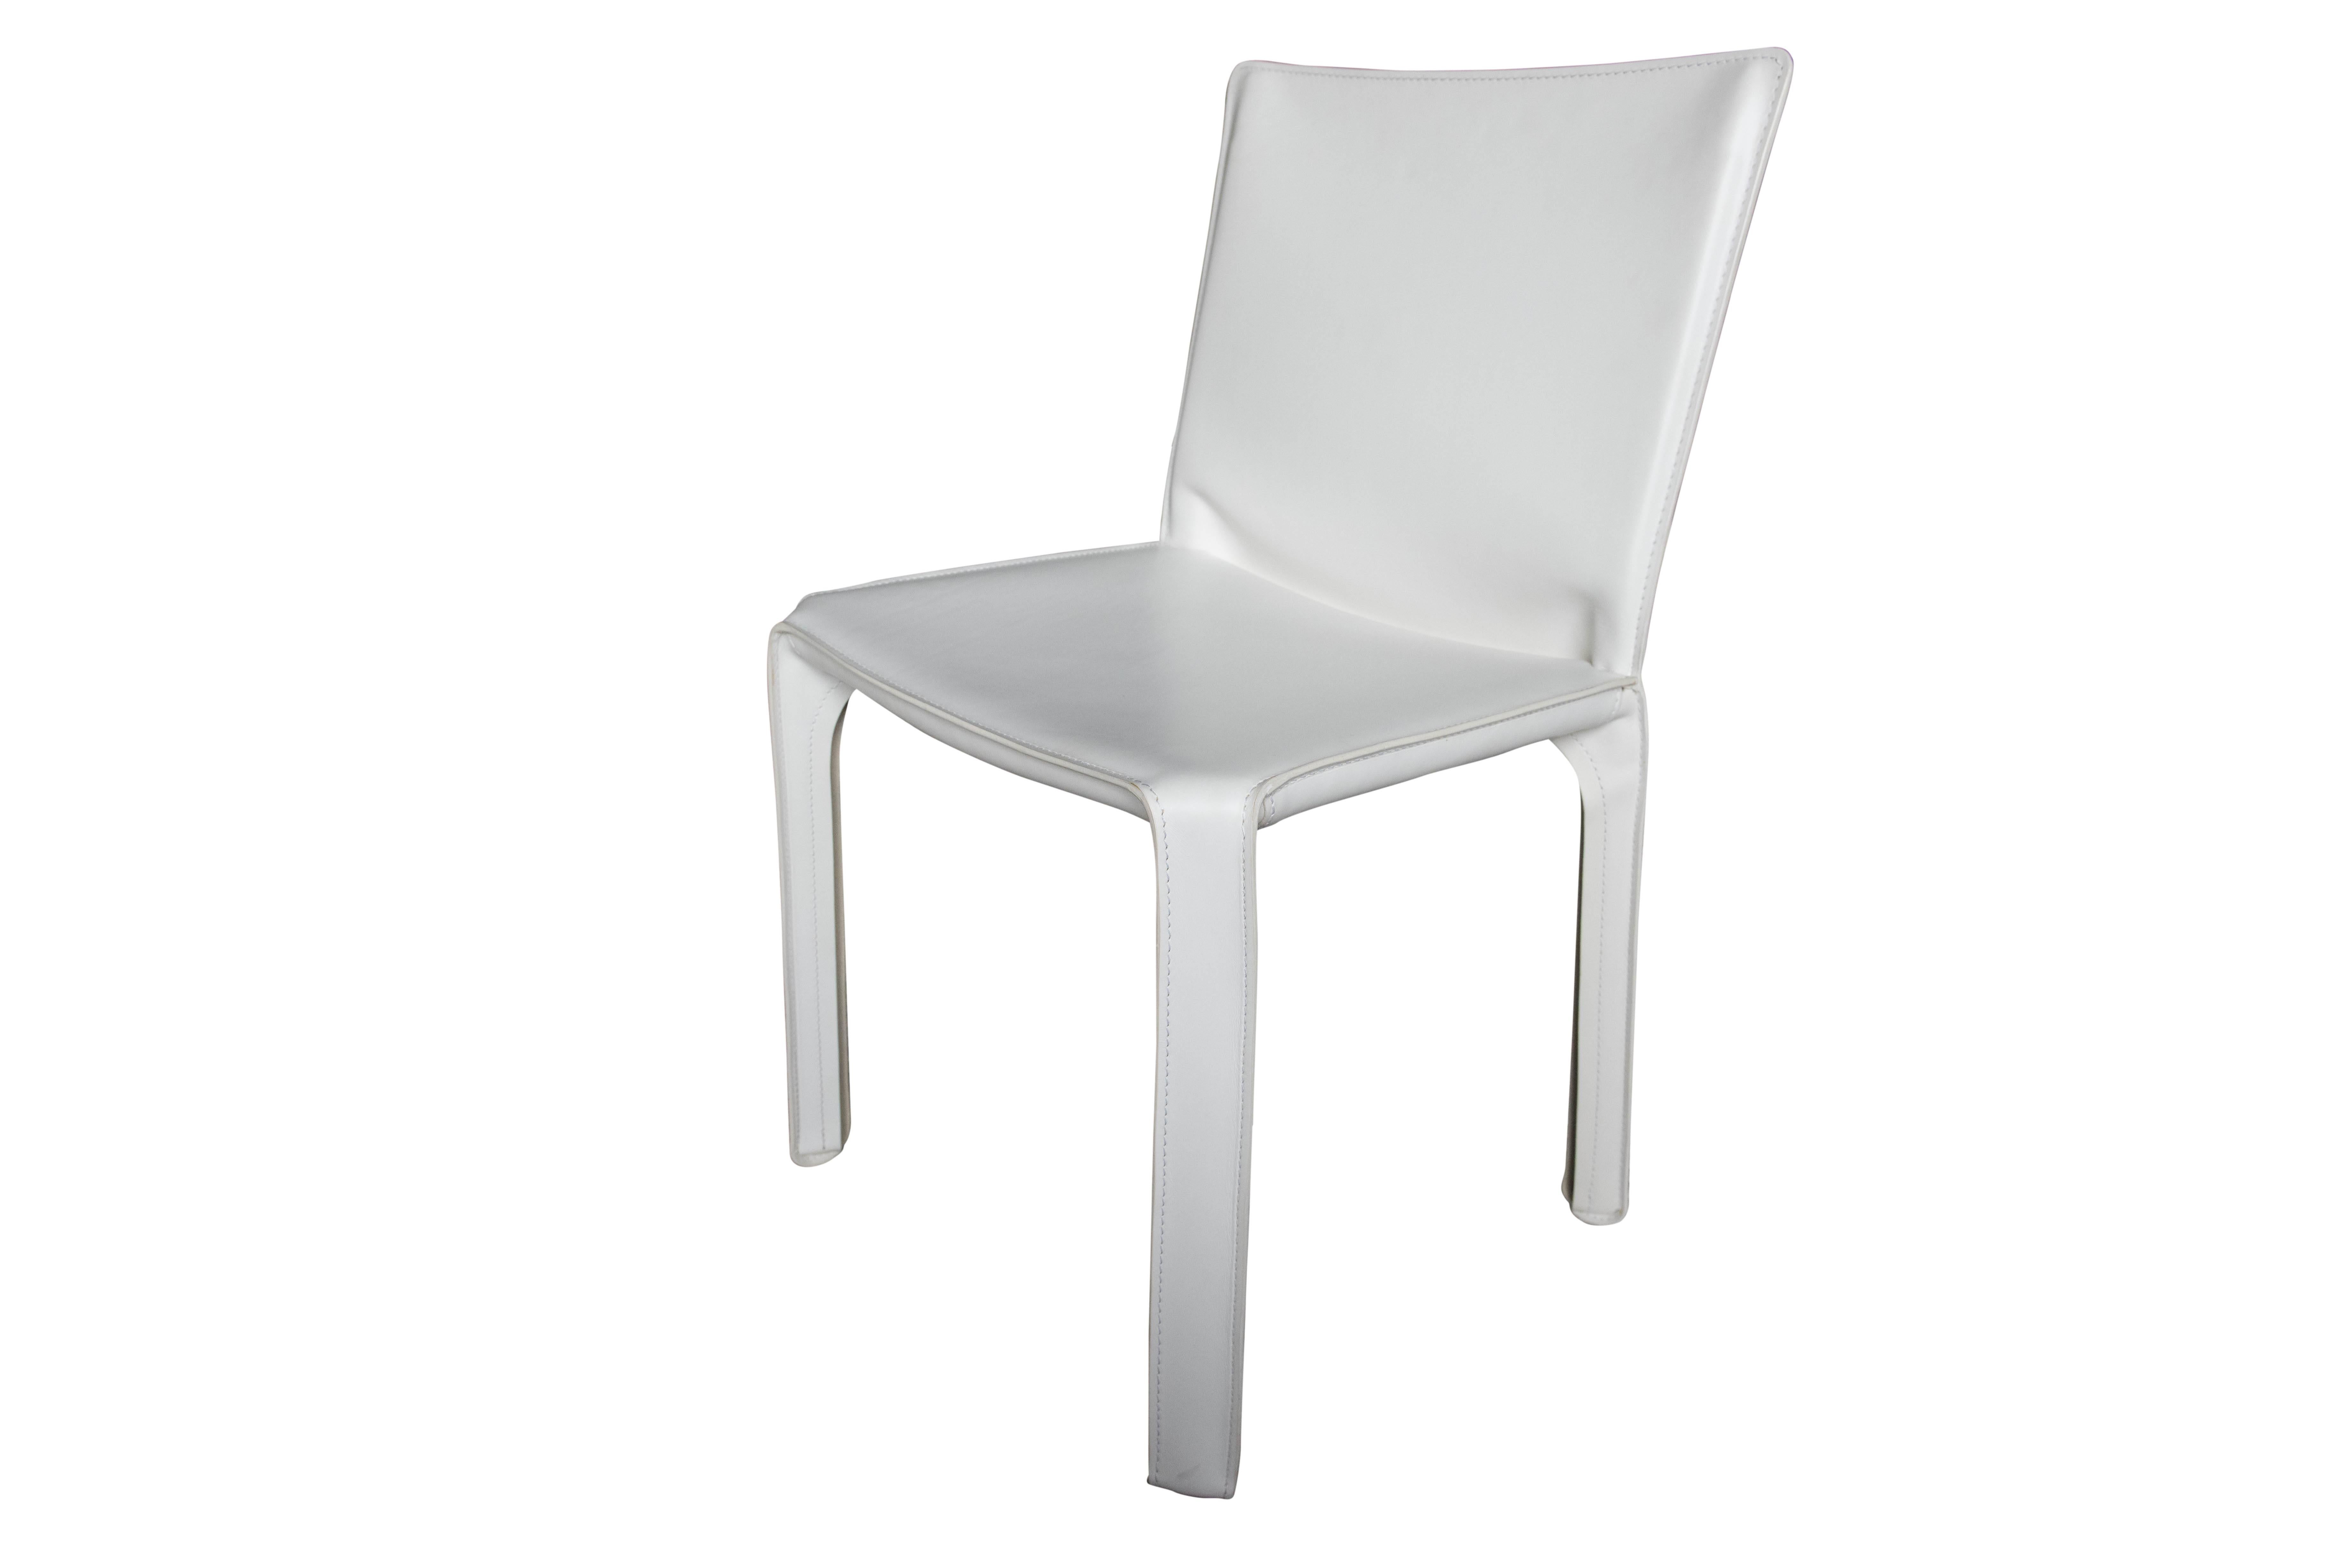 Cassina Cab Chair in White Leather In Excellent Condition For Sale In Houston, TX